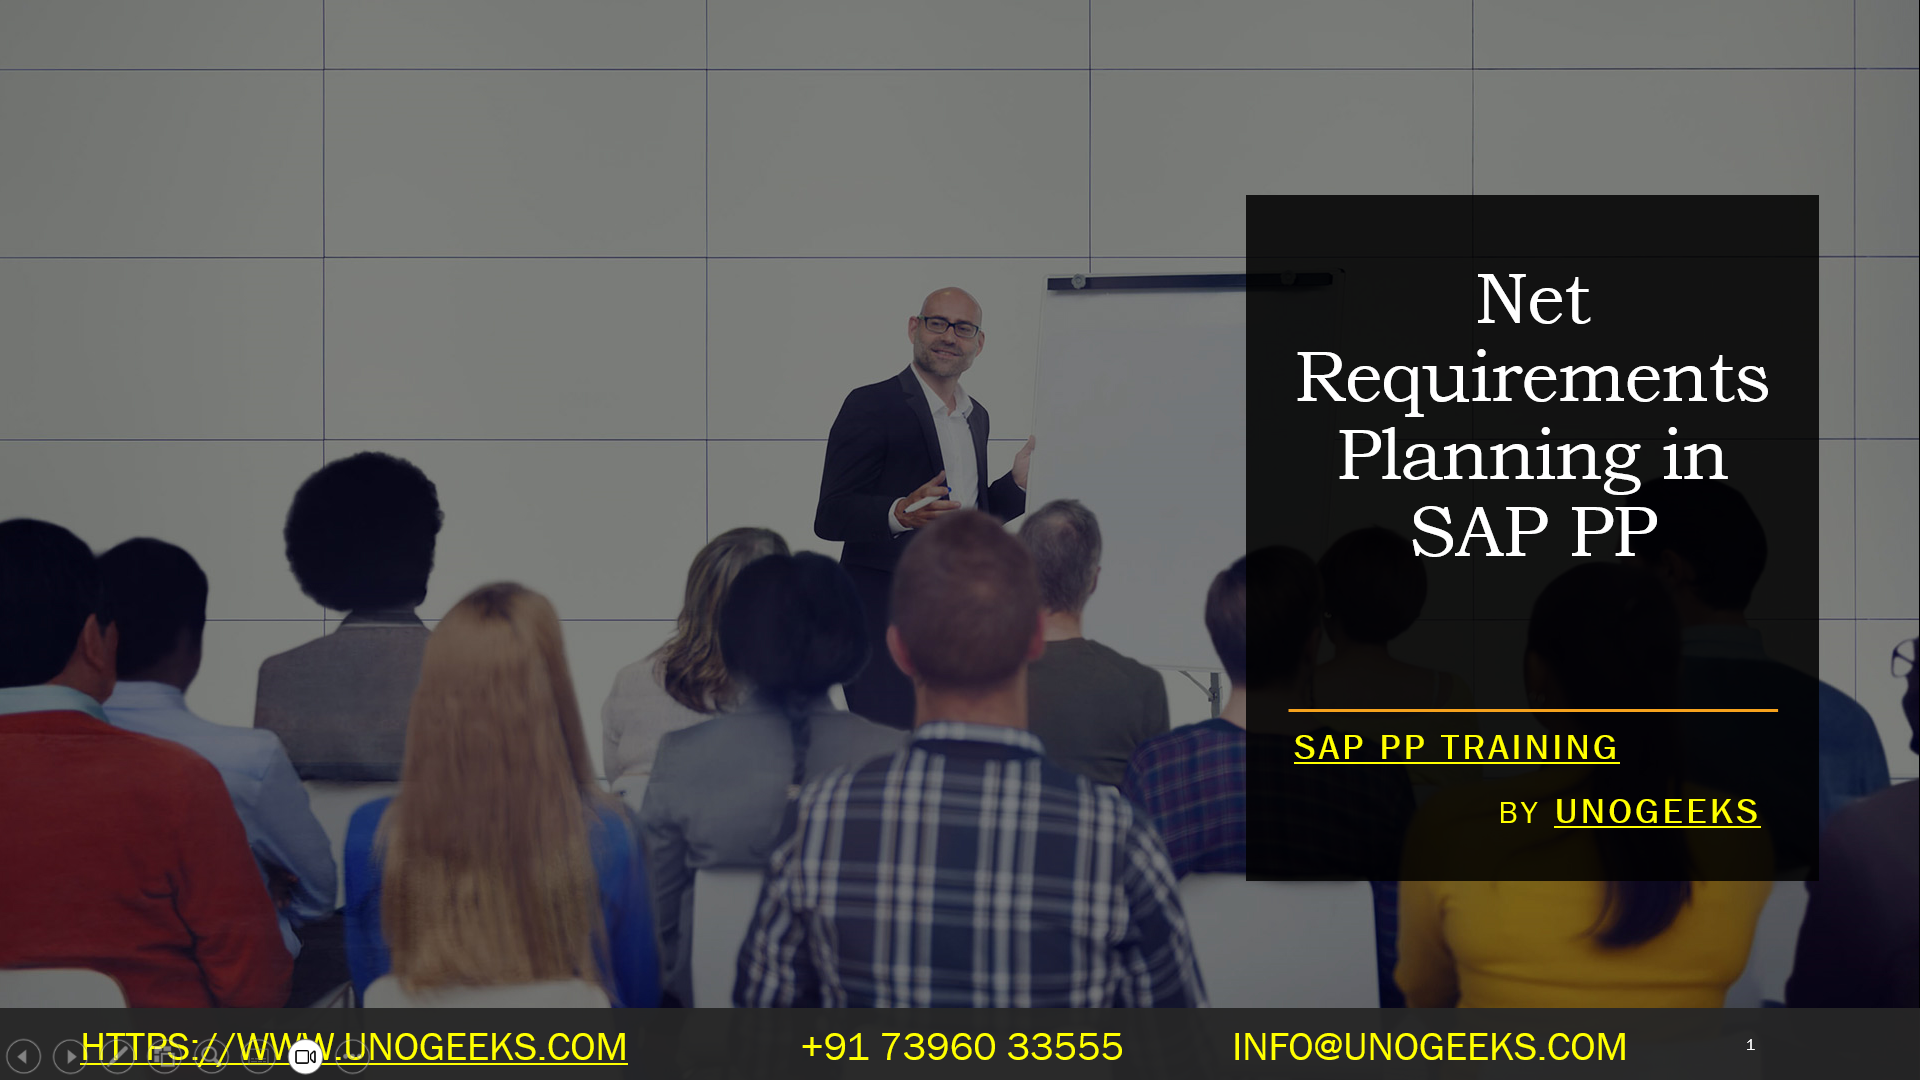 Net Requirements Planning in SAP PP